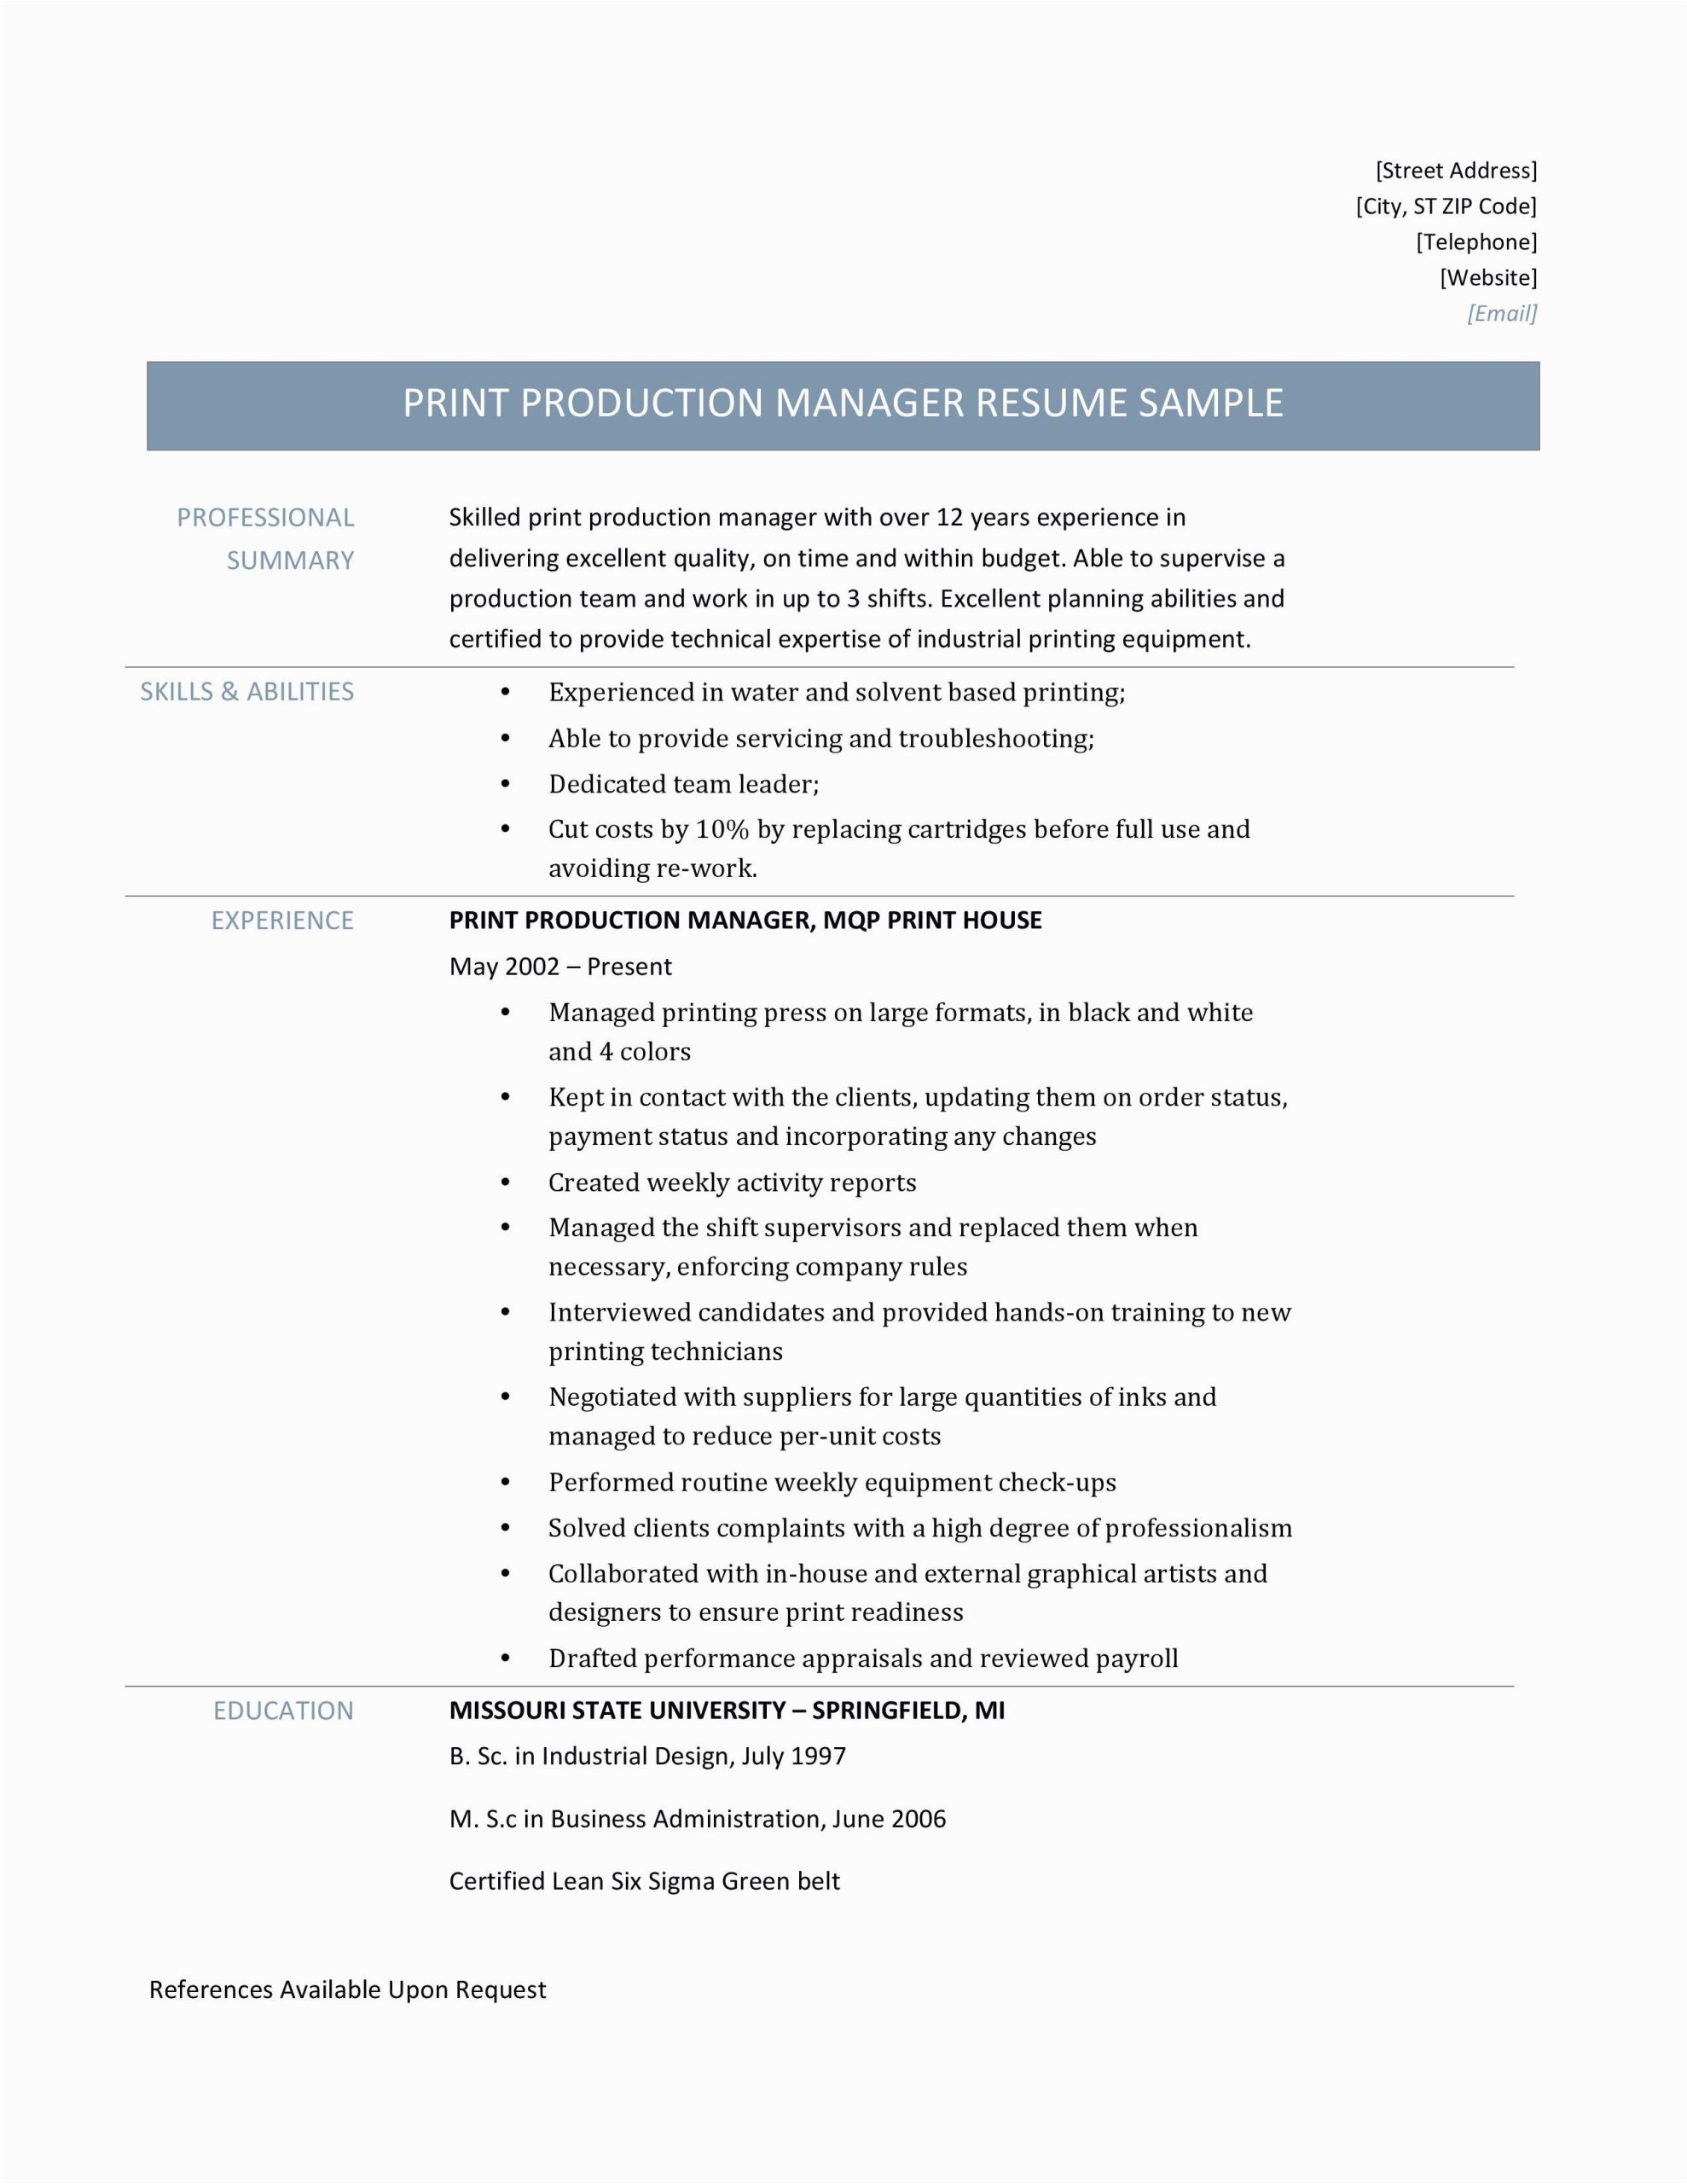 Sample Resume for Print Production Manager Print Production Manager Resume